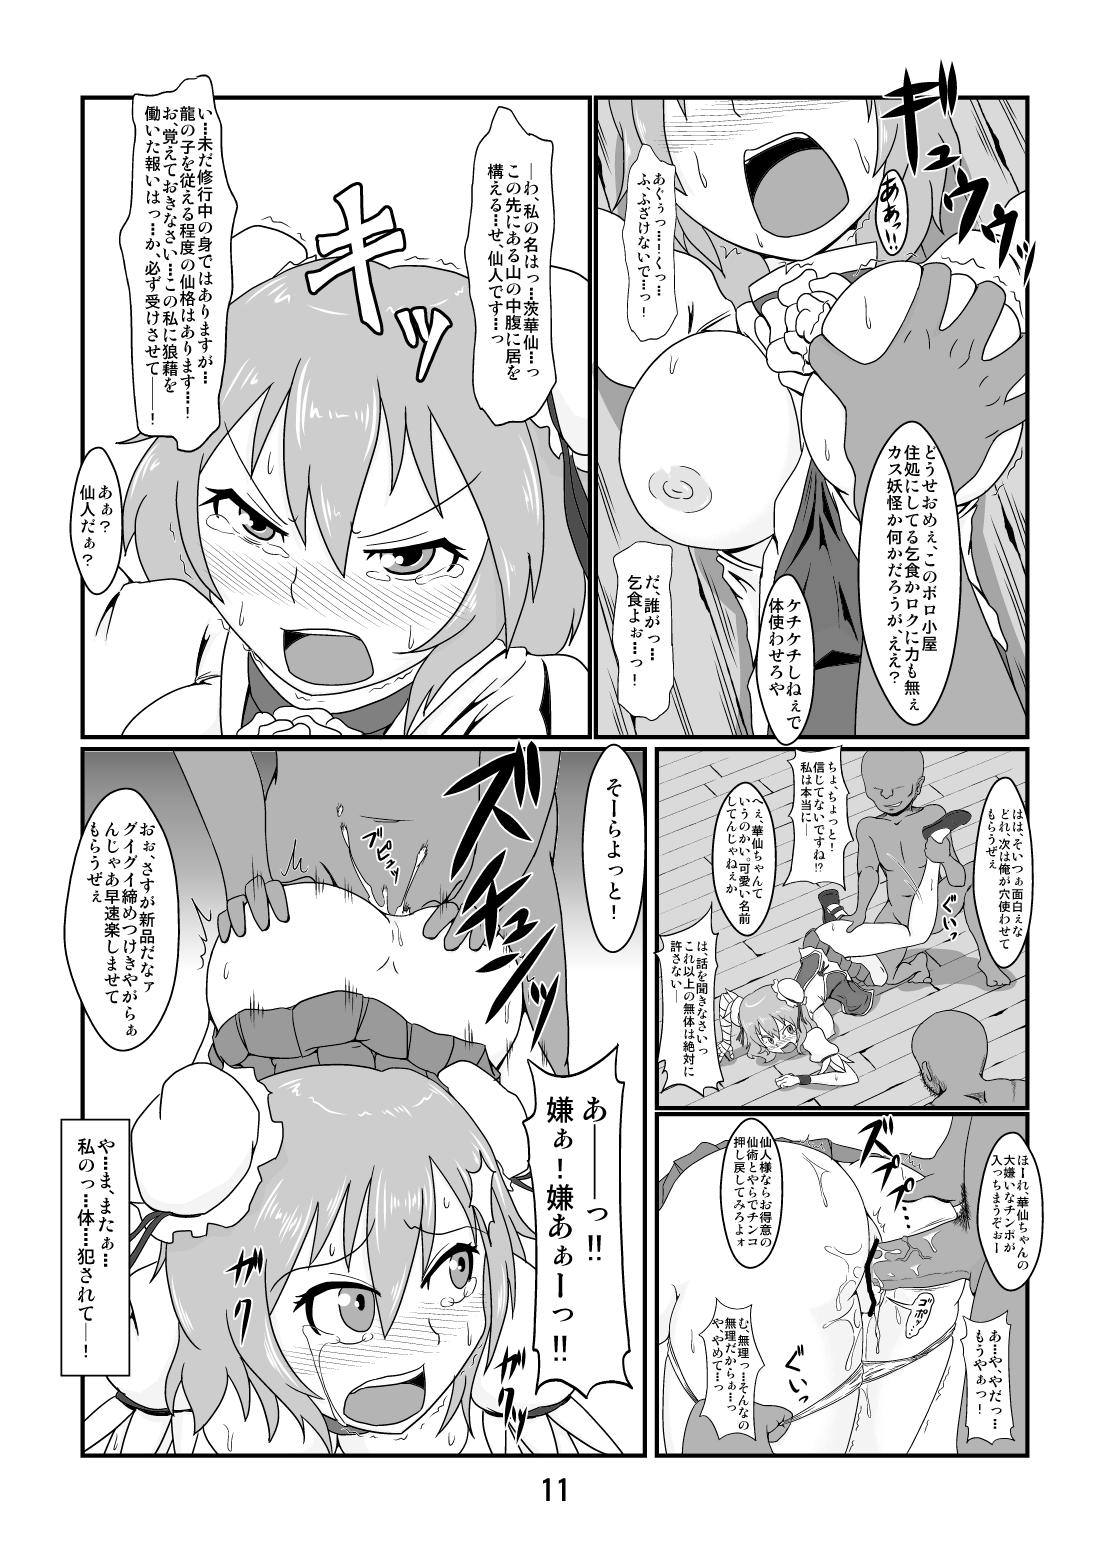 Tit 可哀想な華仙ちゃん - Touhou project Chunky - Page 10